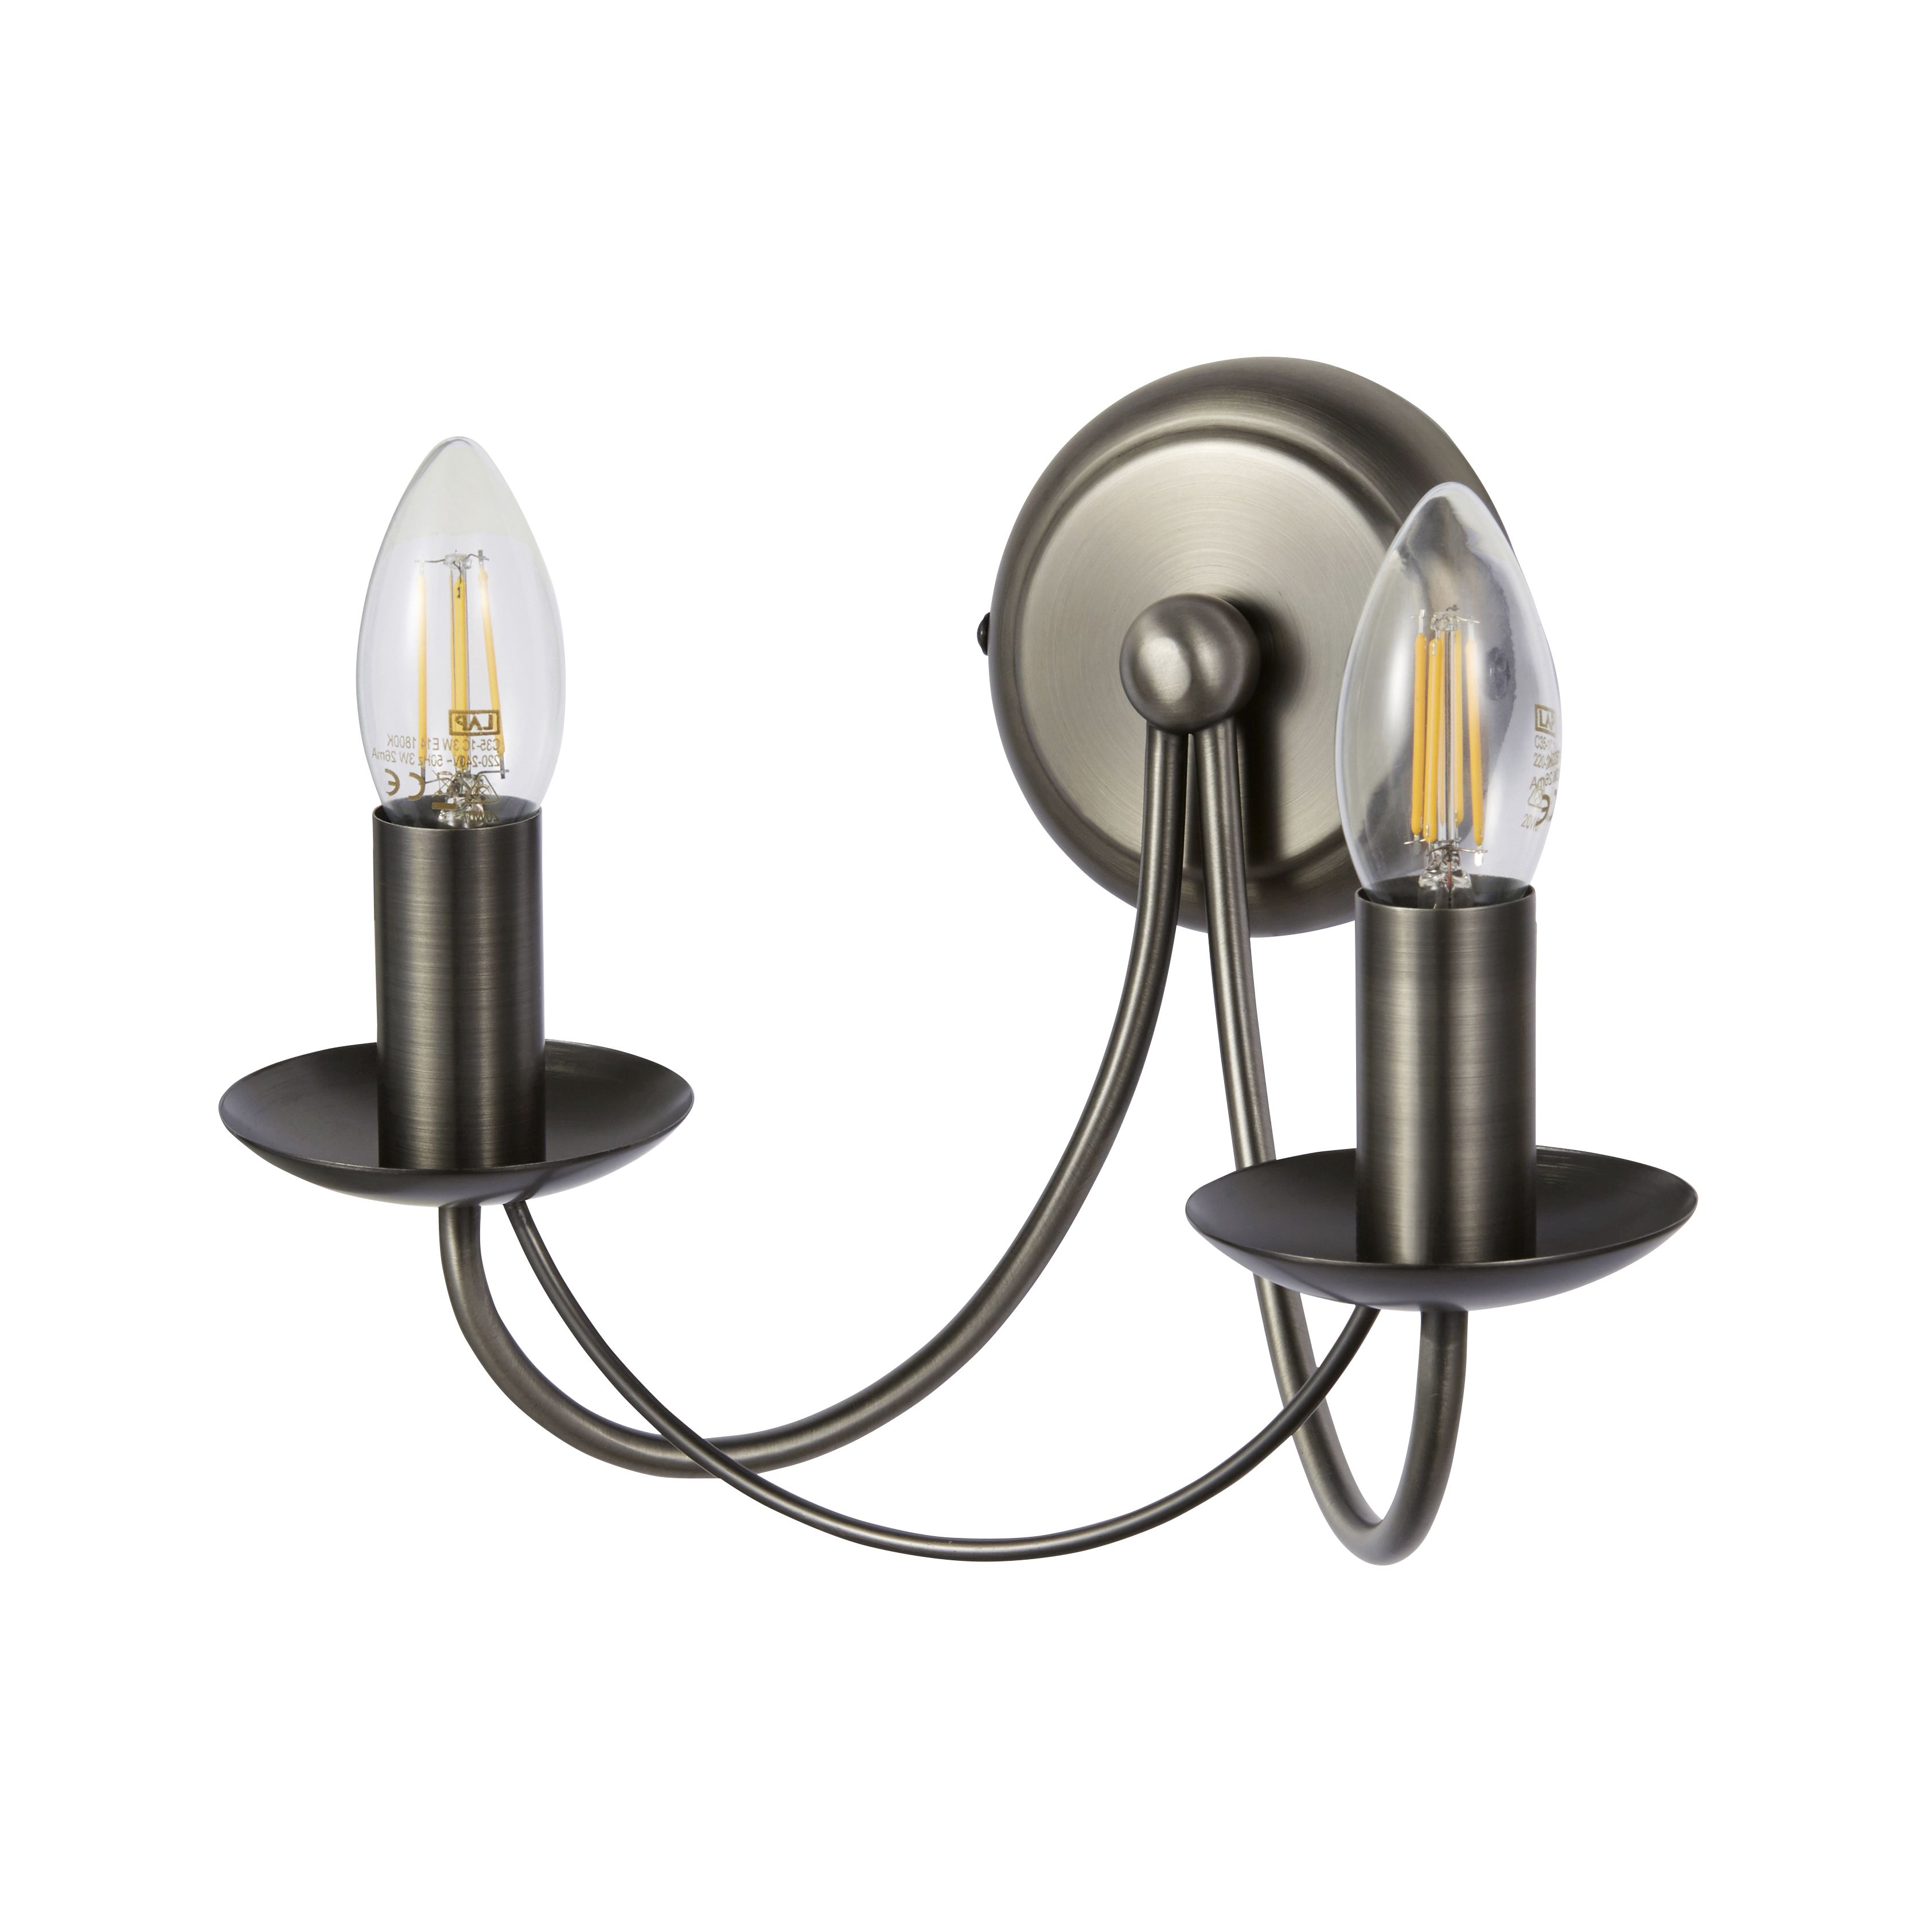 Inlight Freesia Pewter effect Wired Wall light BQ-36243-PEW